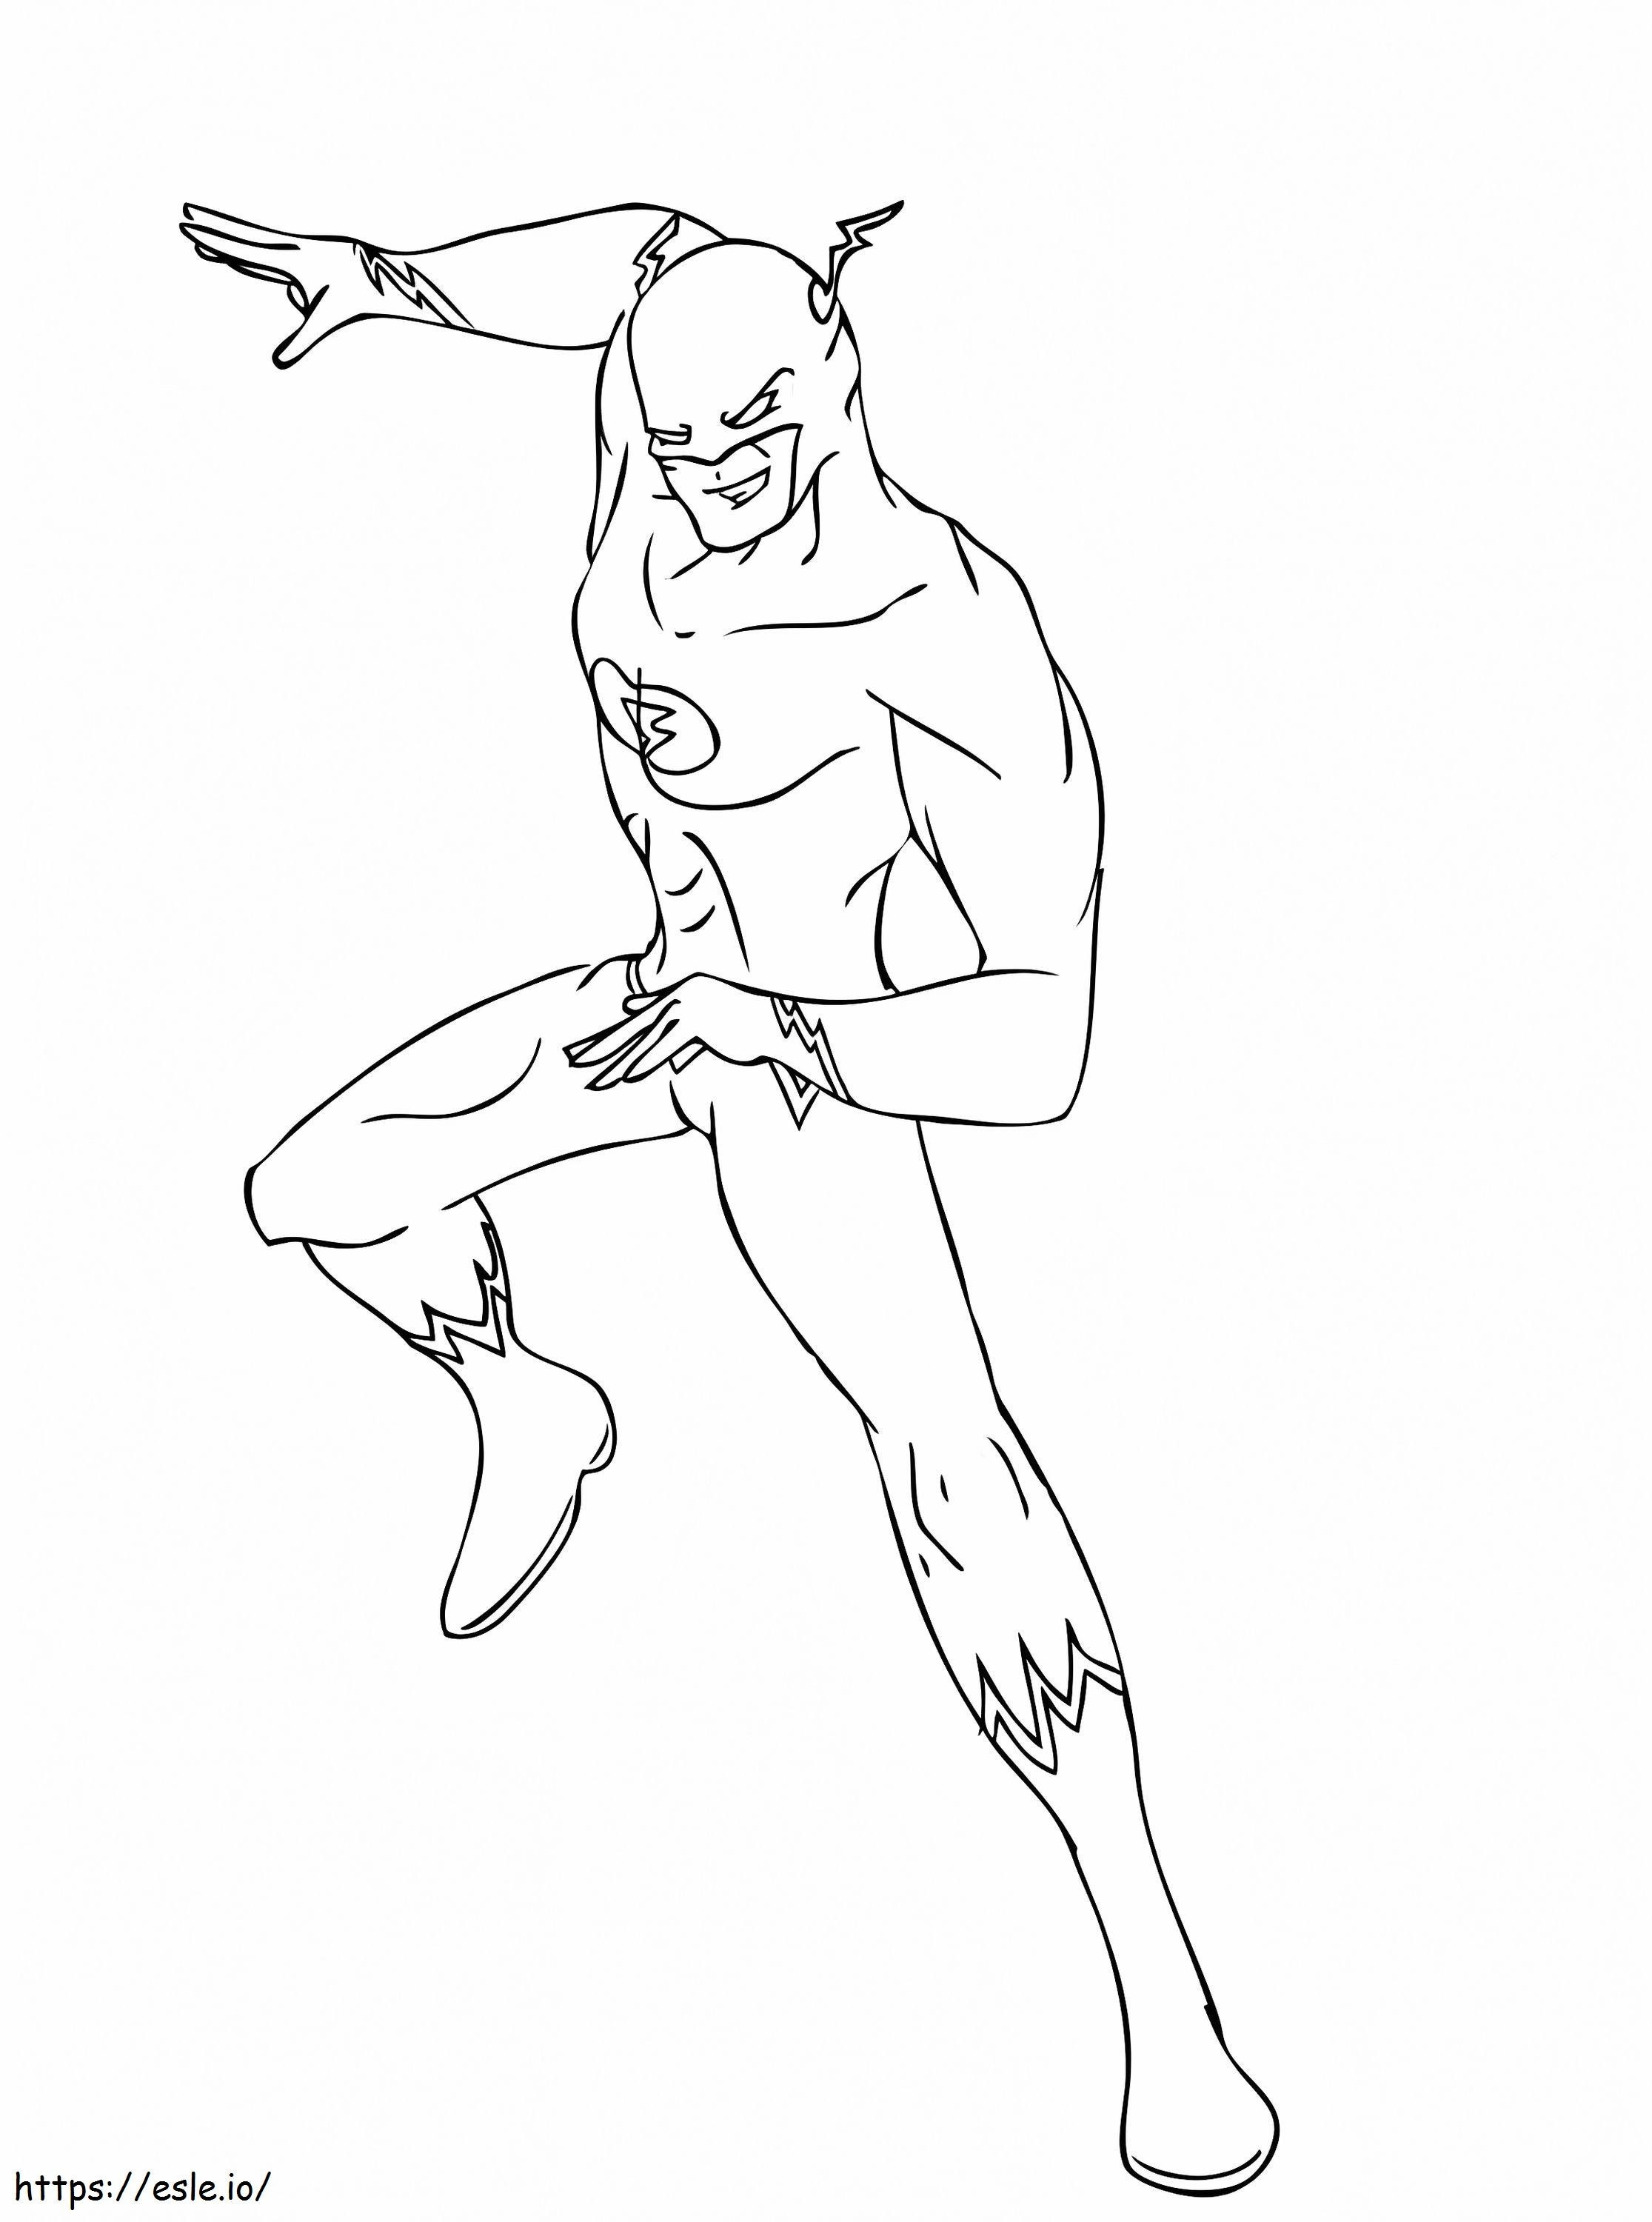 The Flash From Dc Comics coloring page